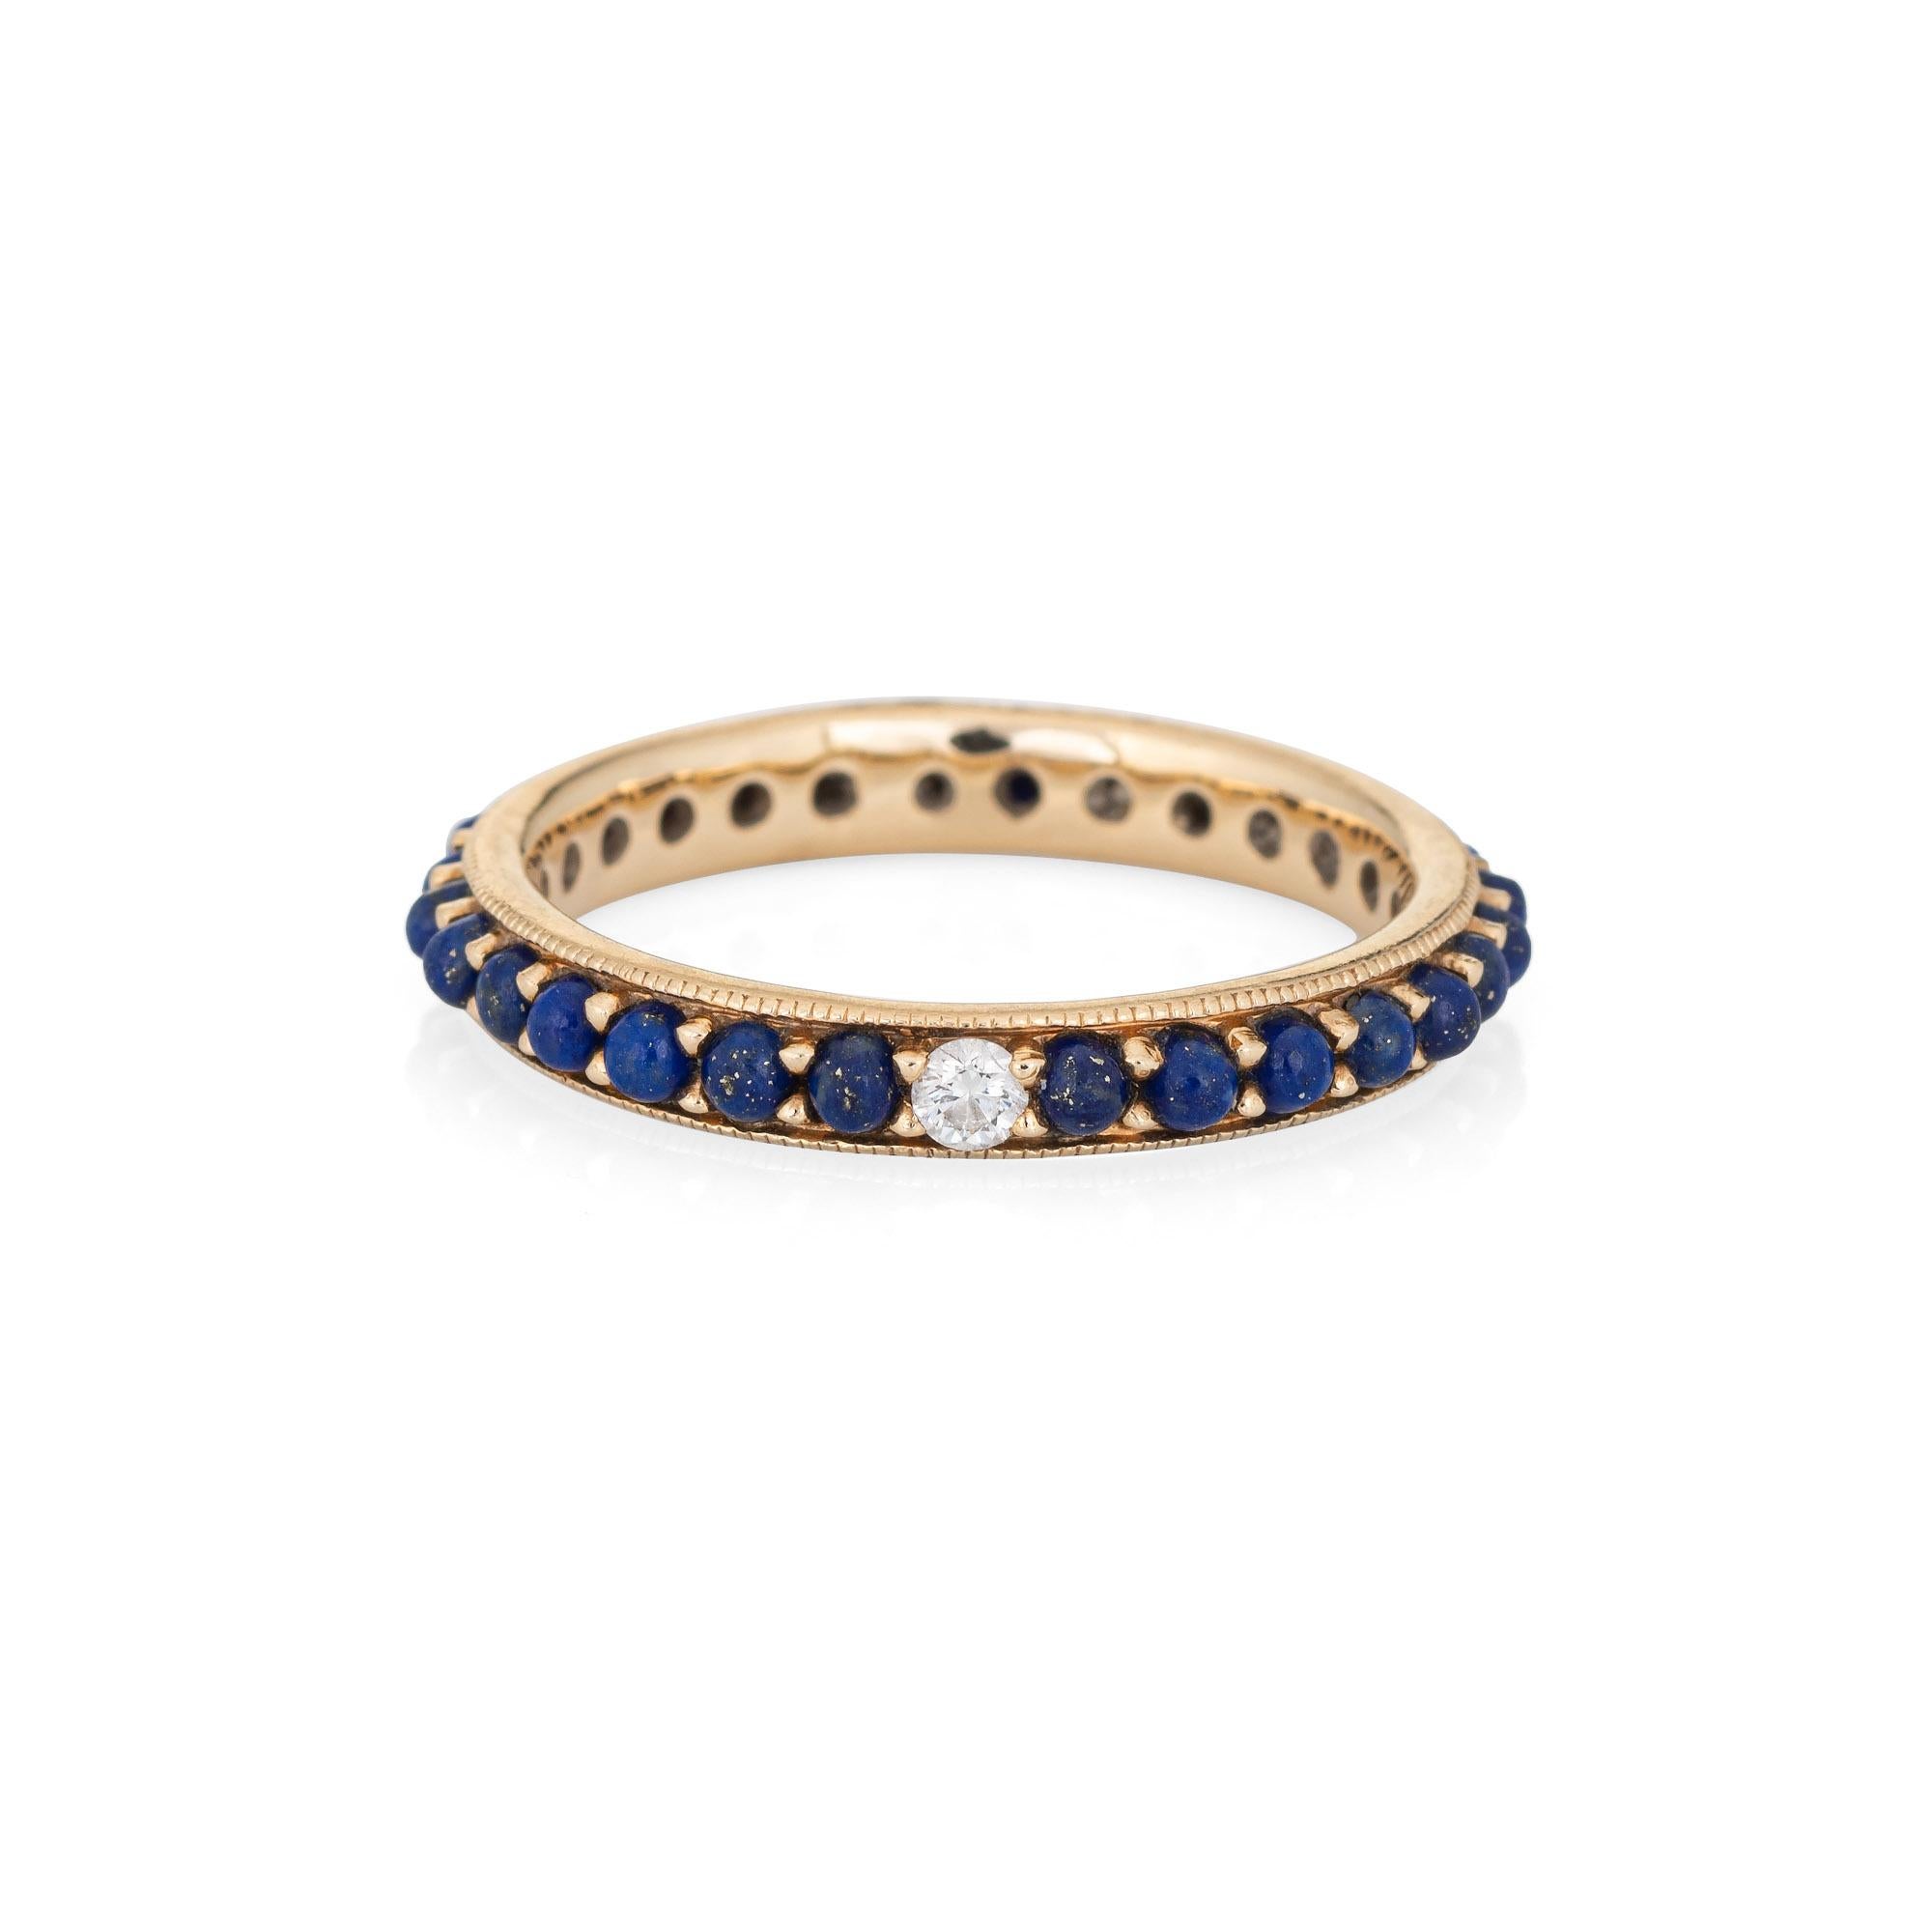 Stylish lapis lazuli & diamond eternity ring crafted in 14 karat yellow gold. 

Cabochon cut lapis lazuli measures 1.5mm each. The diamond is estimated at 0.02 carats (estimated at H-I color and SI1 clarity). The lapis is in very good condition and